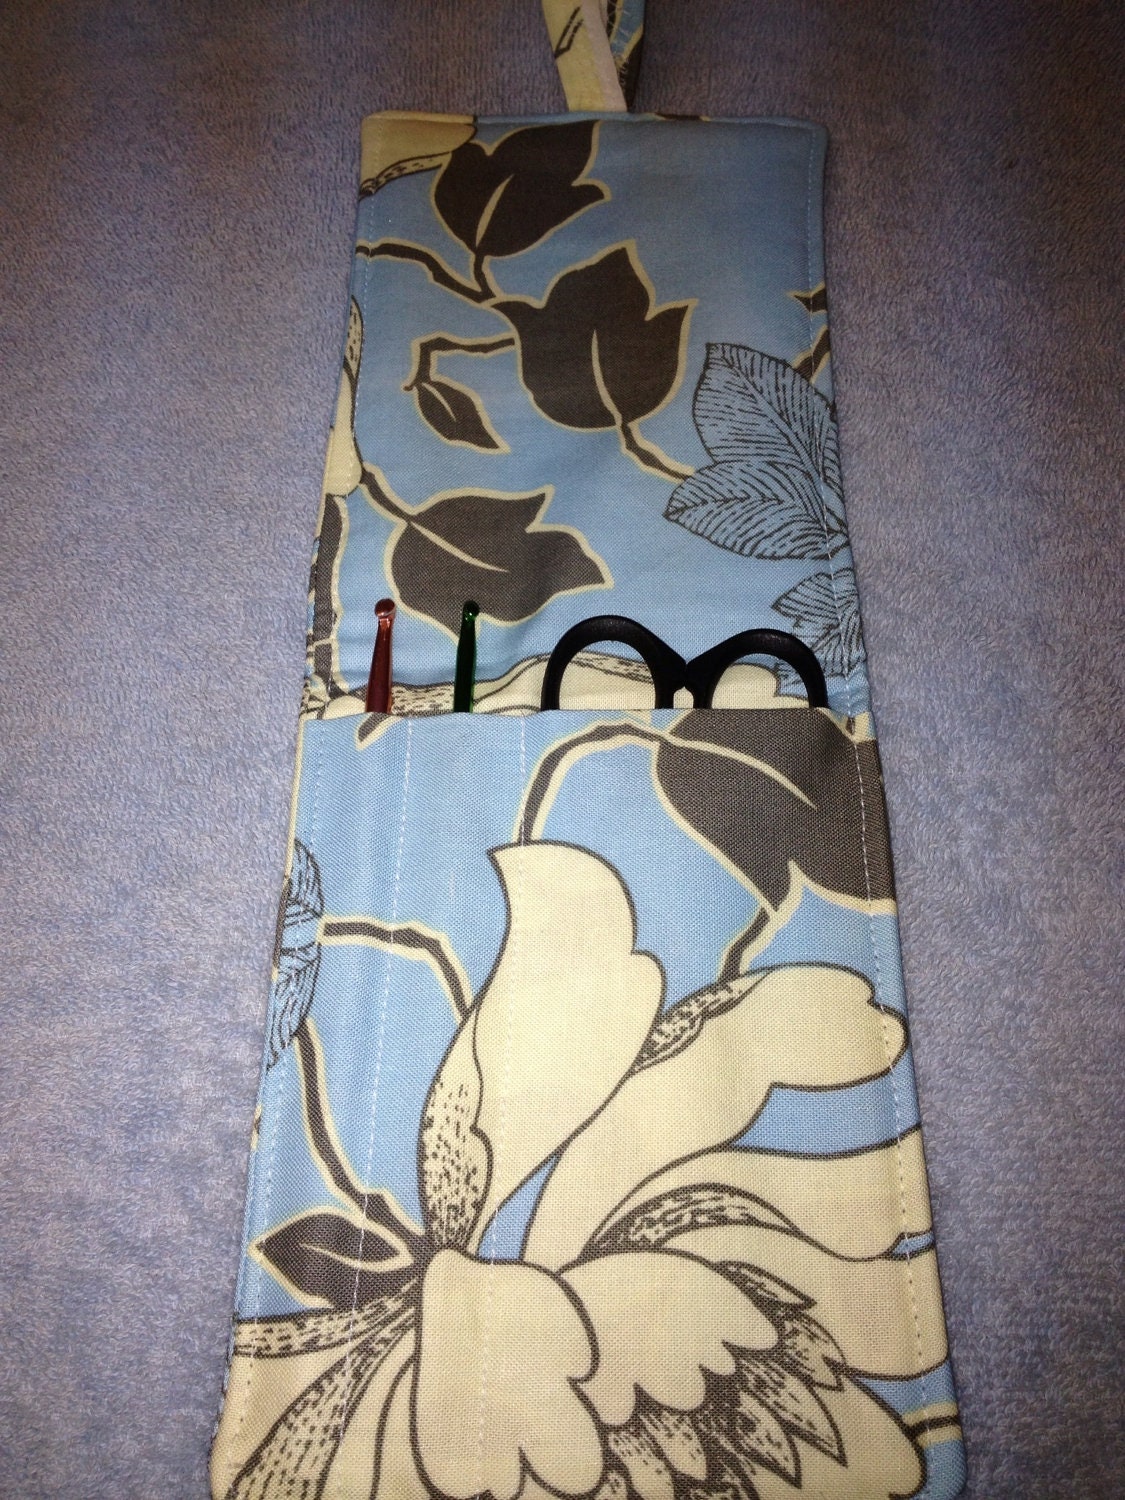 Crochet Hook Holder Organizer Blues Gray White Floral to go Holds 2 Needles and Scissors